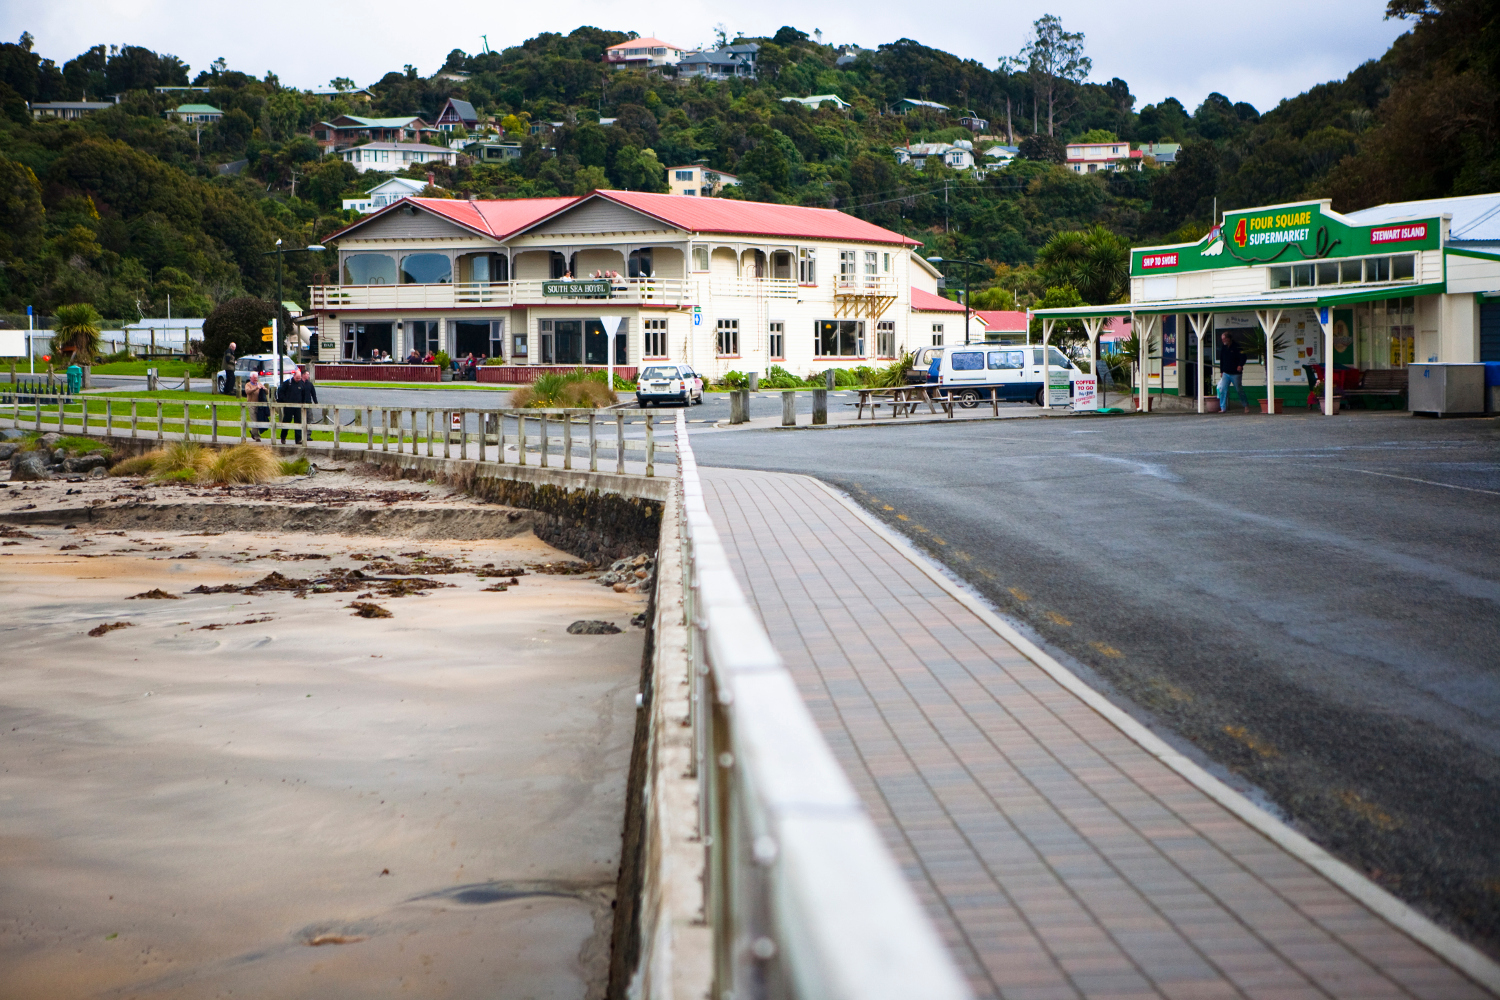 About as southern as can be: the South Sea Hotel on Stewart Island. Image by Matthew Micah Wright / Lonely Planet Images / Getty